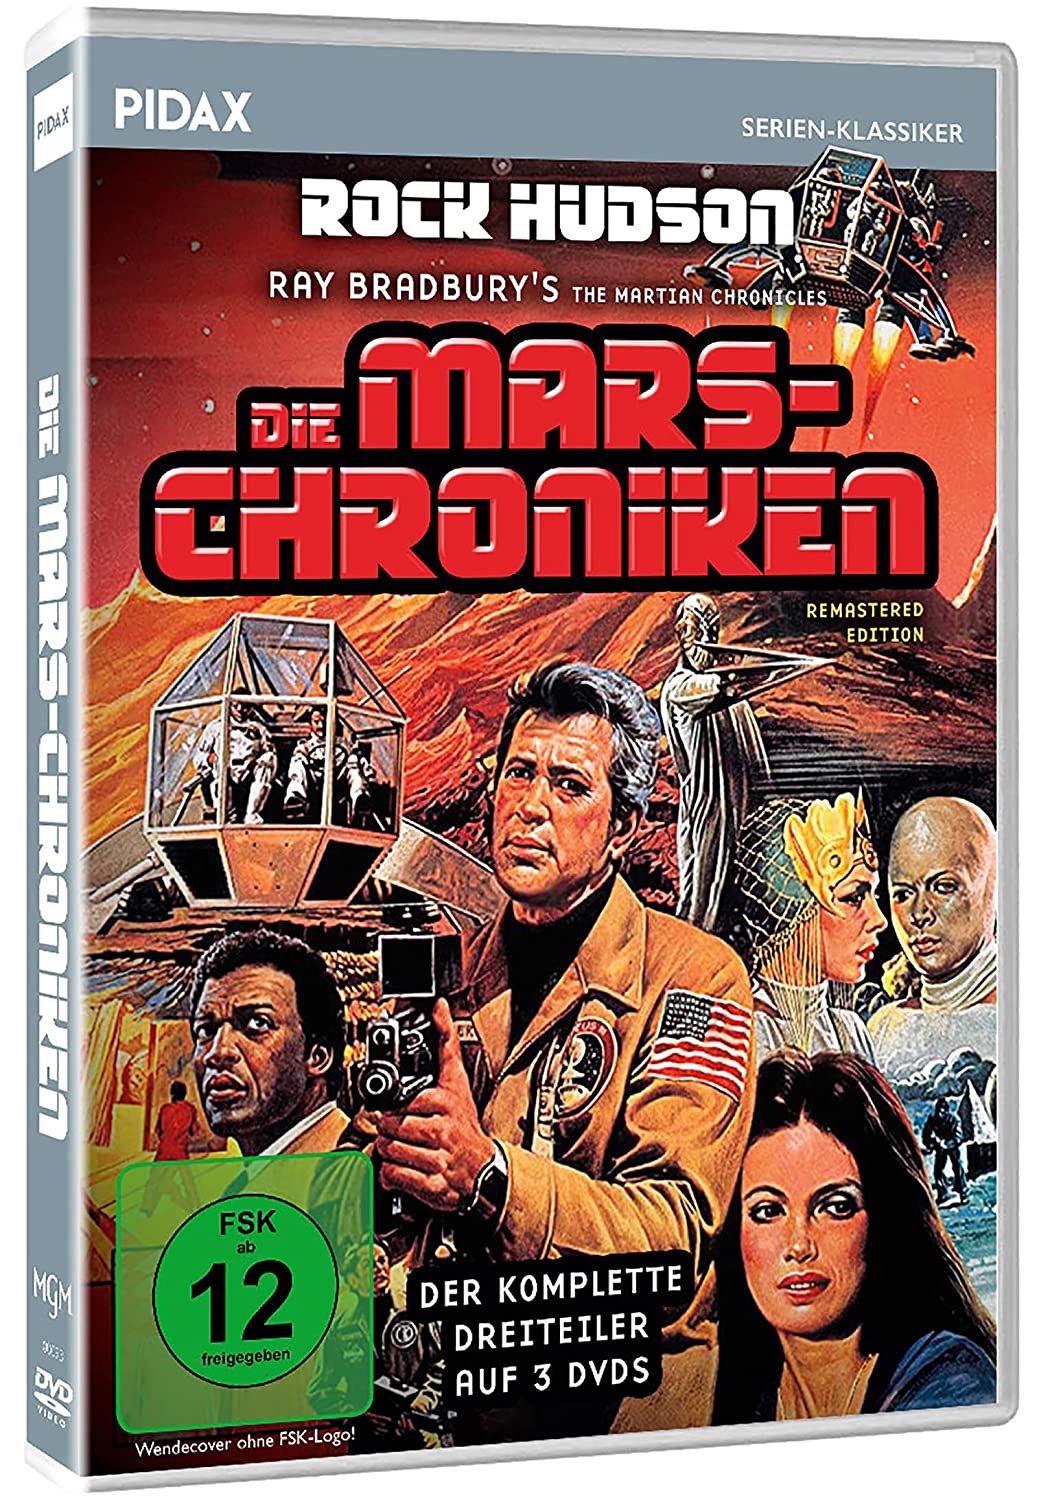 Die Mars-Chroniken (The Martian Chronicles) - Remastered Edition